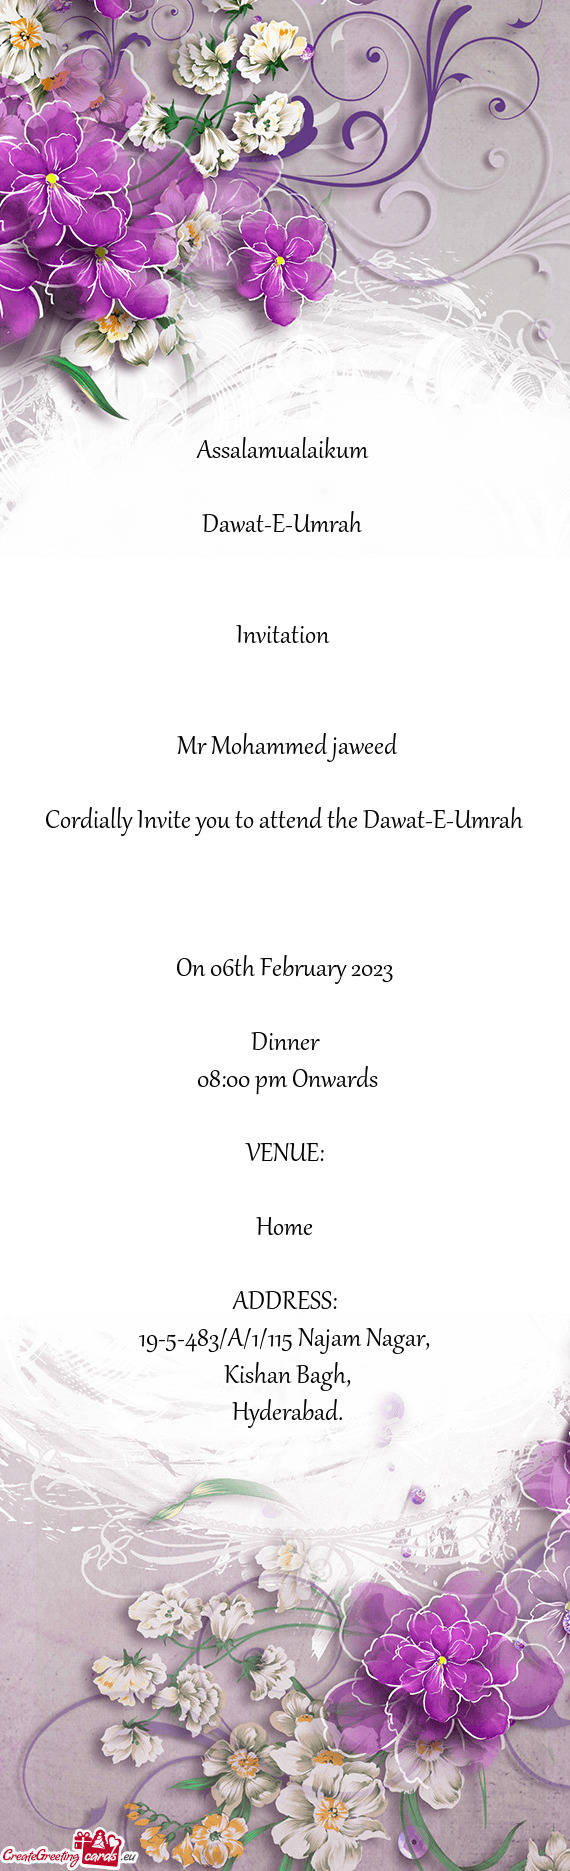 Mr Mohammed jaweed